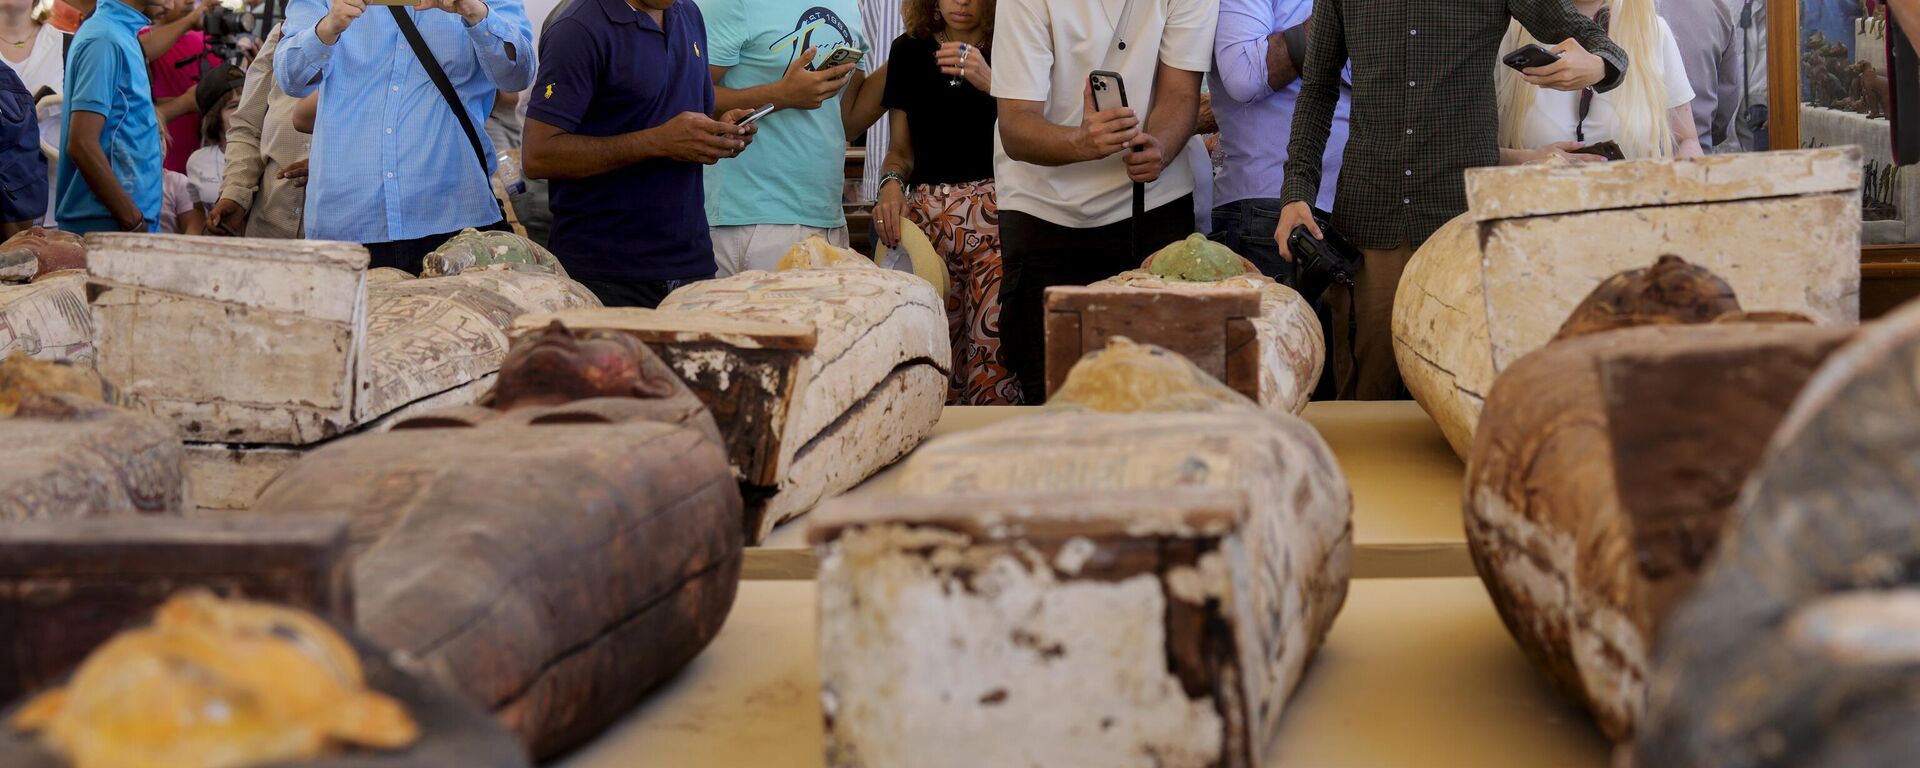 Reporters film painted coffins with well-preserved mummies inside, dating back to the Late Period of ancient Egypt around 500 B.C, displayed during a press conference at a makeshift exhibit at the feet of the Step Pyramid of Djoser in Saqqara, 24 kilometers (15 miles) southwest of Cairo, Egypt, Monday, May 30, 2022. - Sputnik International, 1920, 10.12.2022